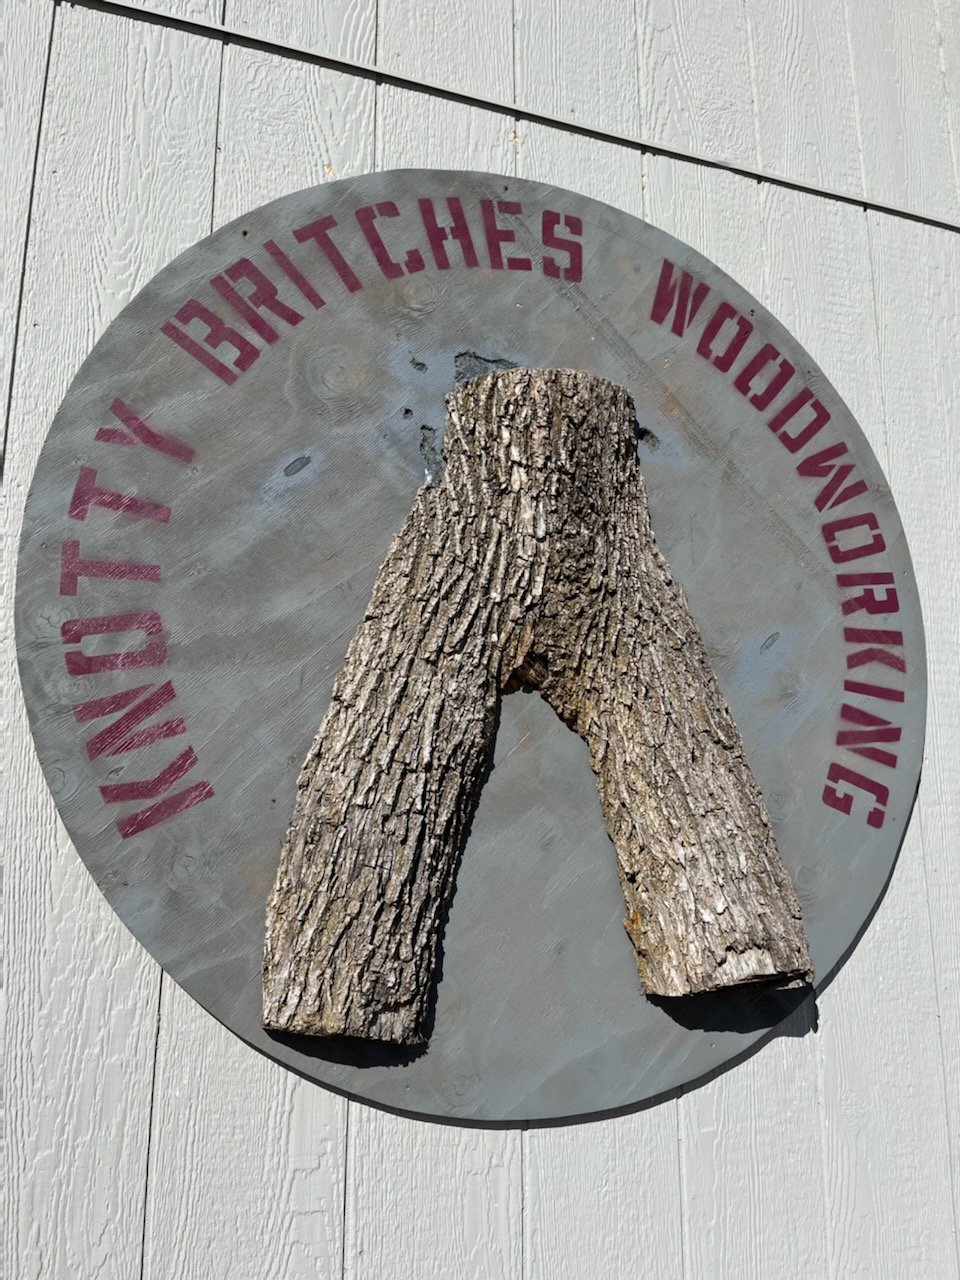 Knotty Britches Workshop Sign